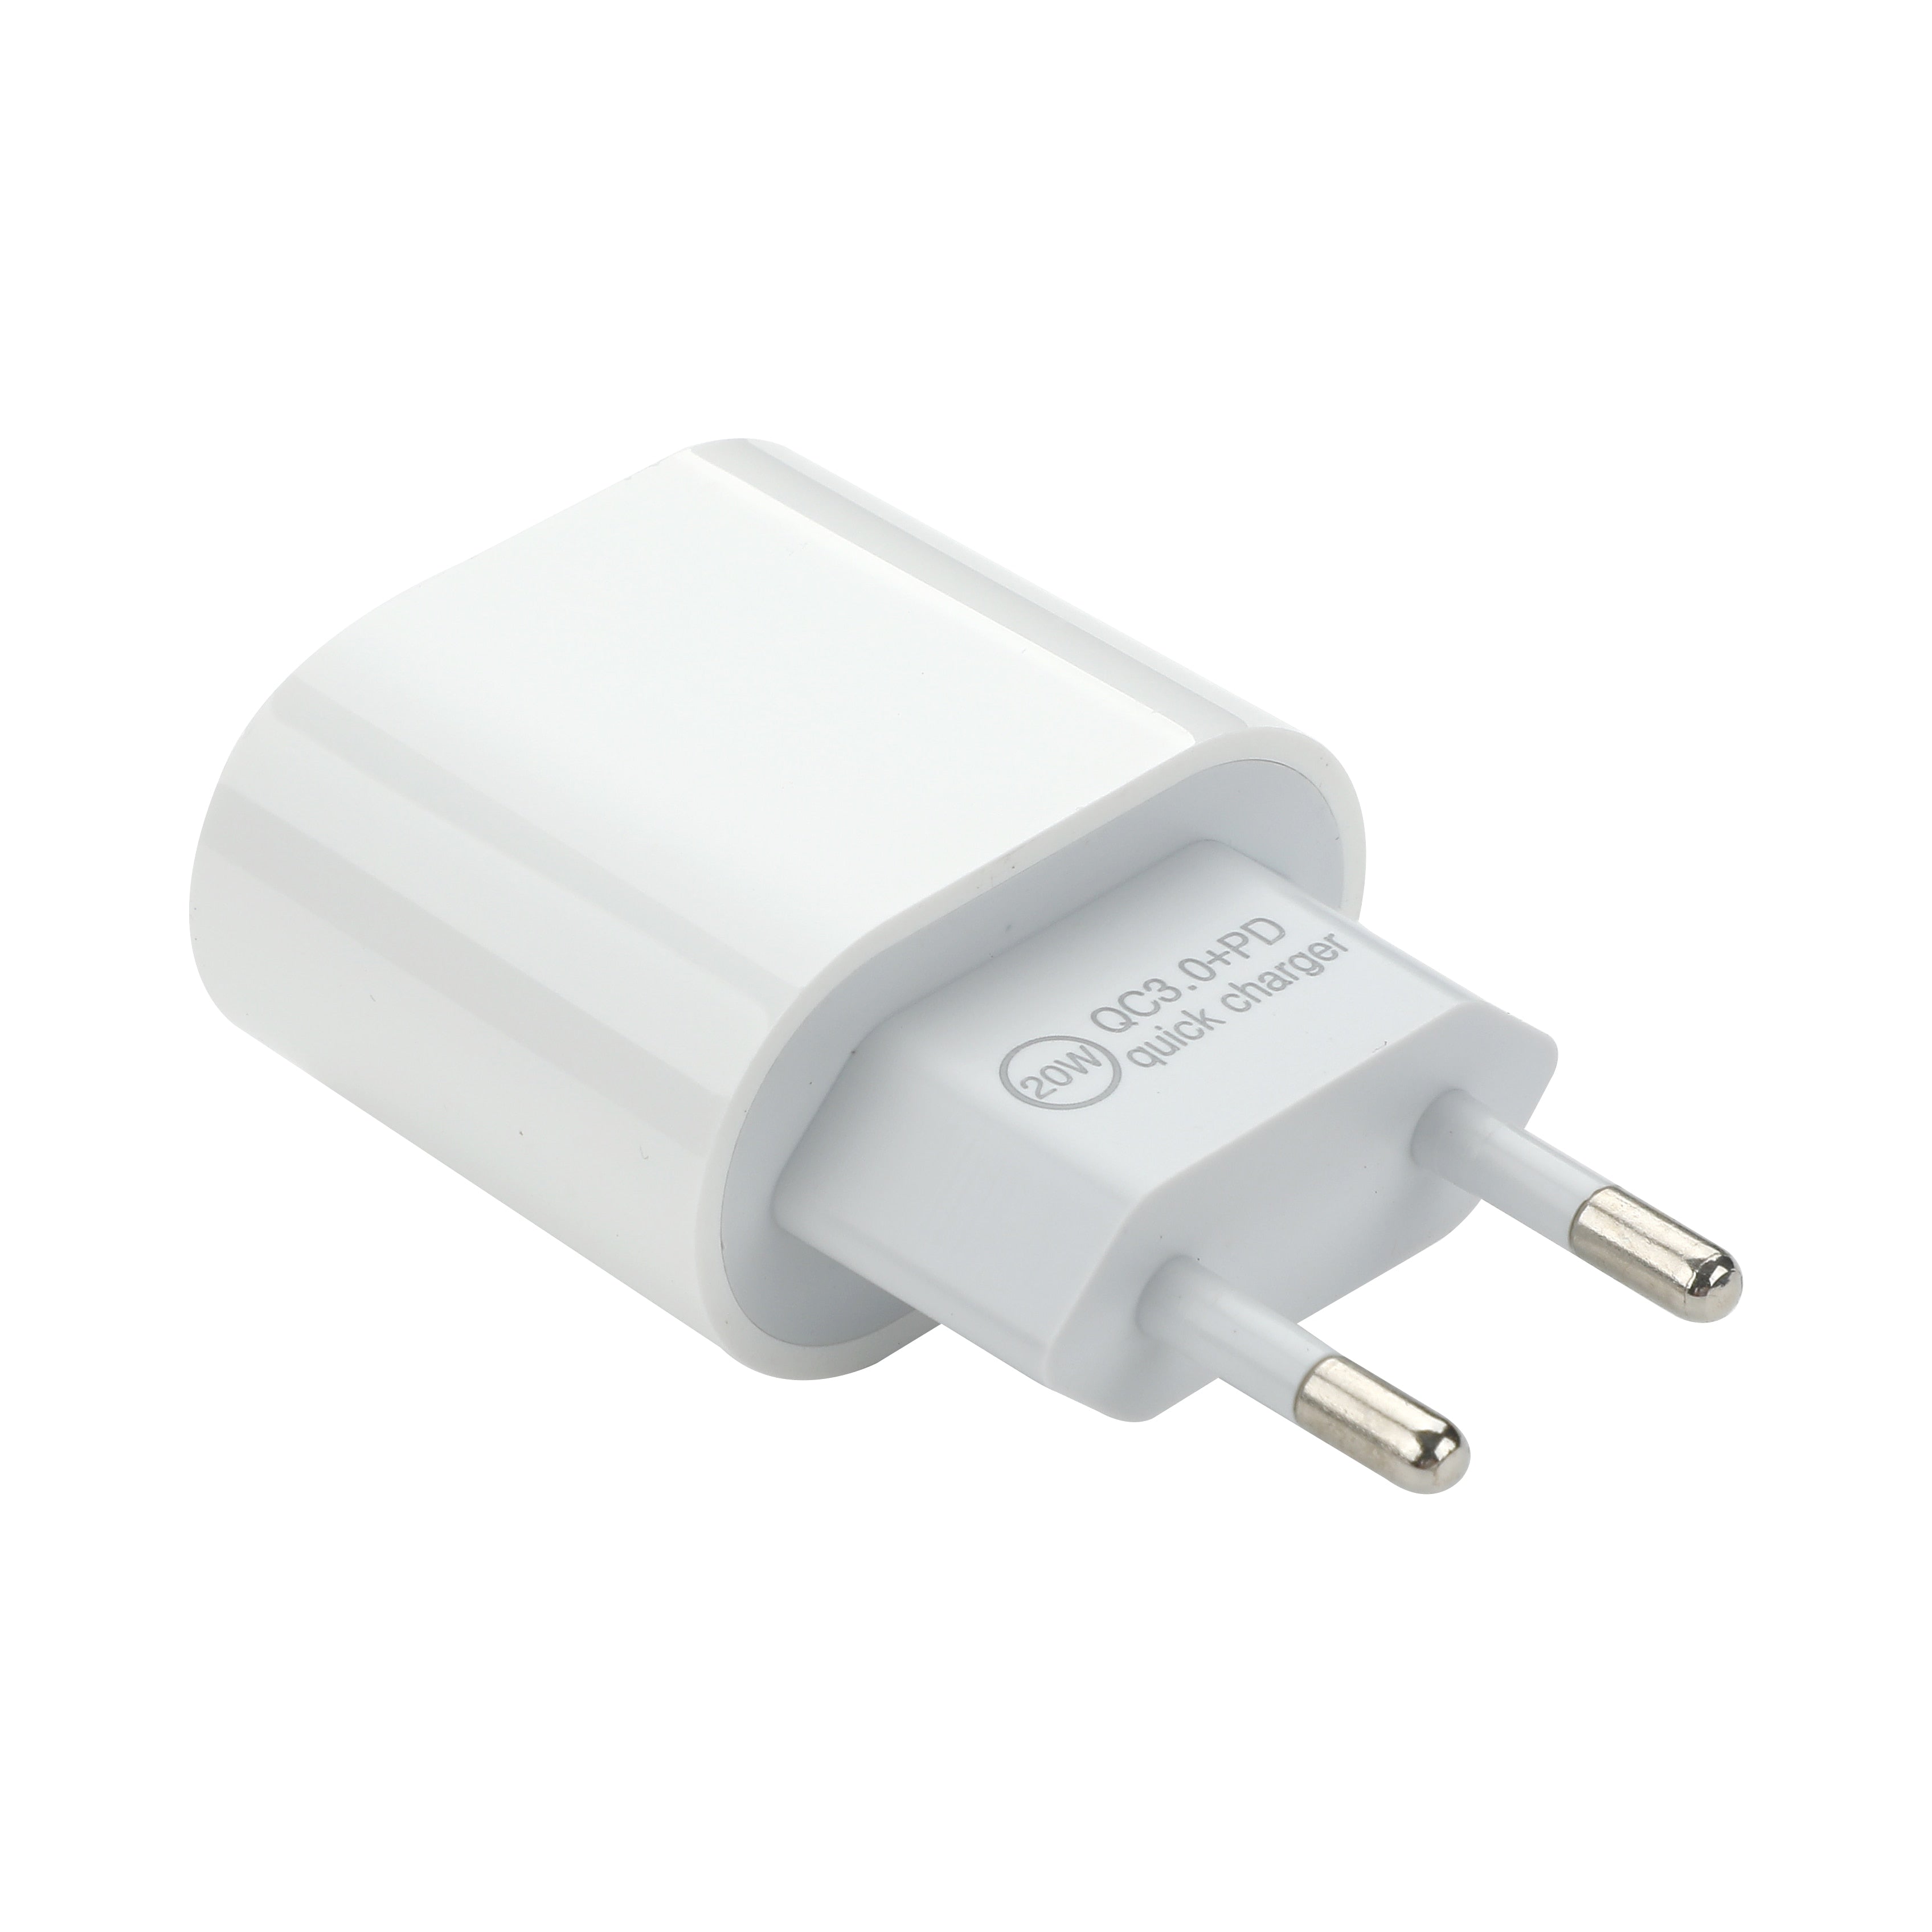 The Z1 USB C charger for iPhone 11, 12, 13, 14 Pro